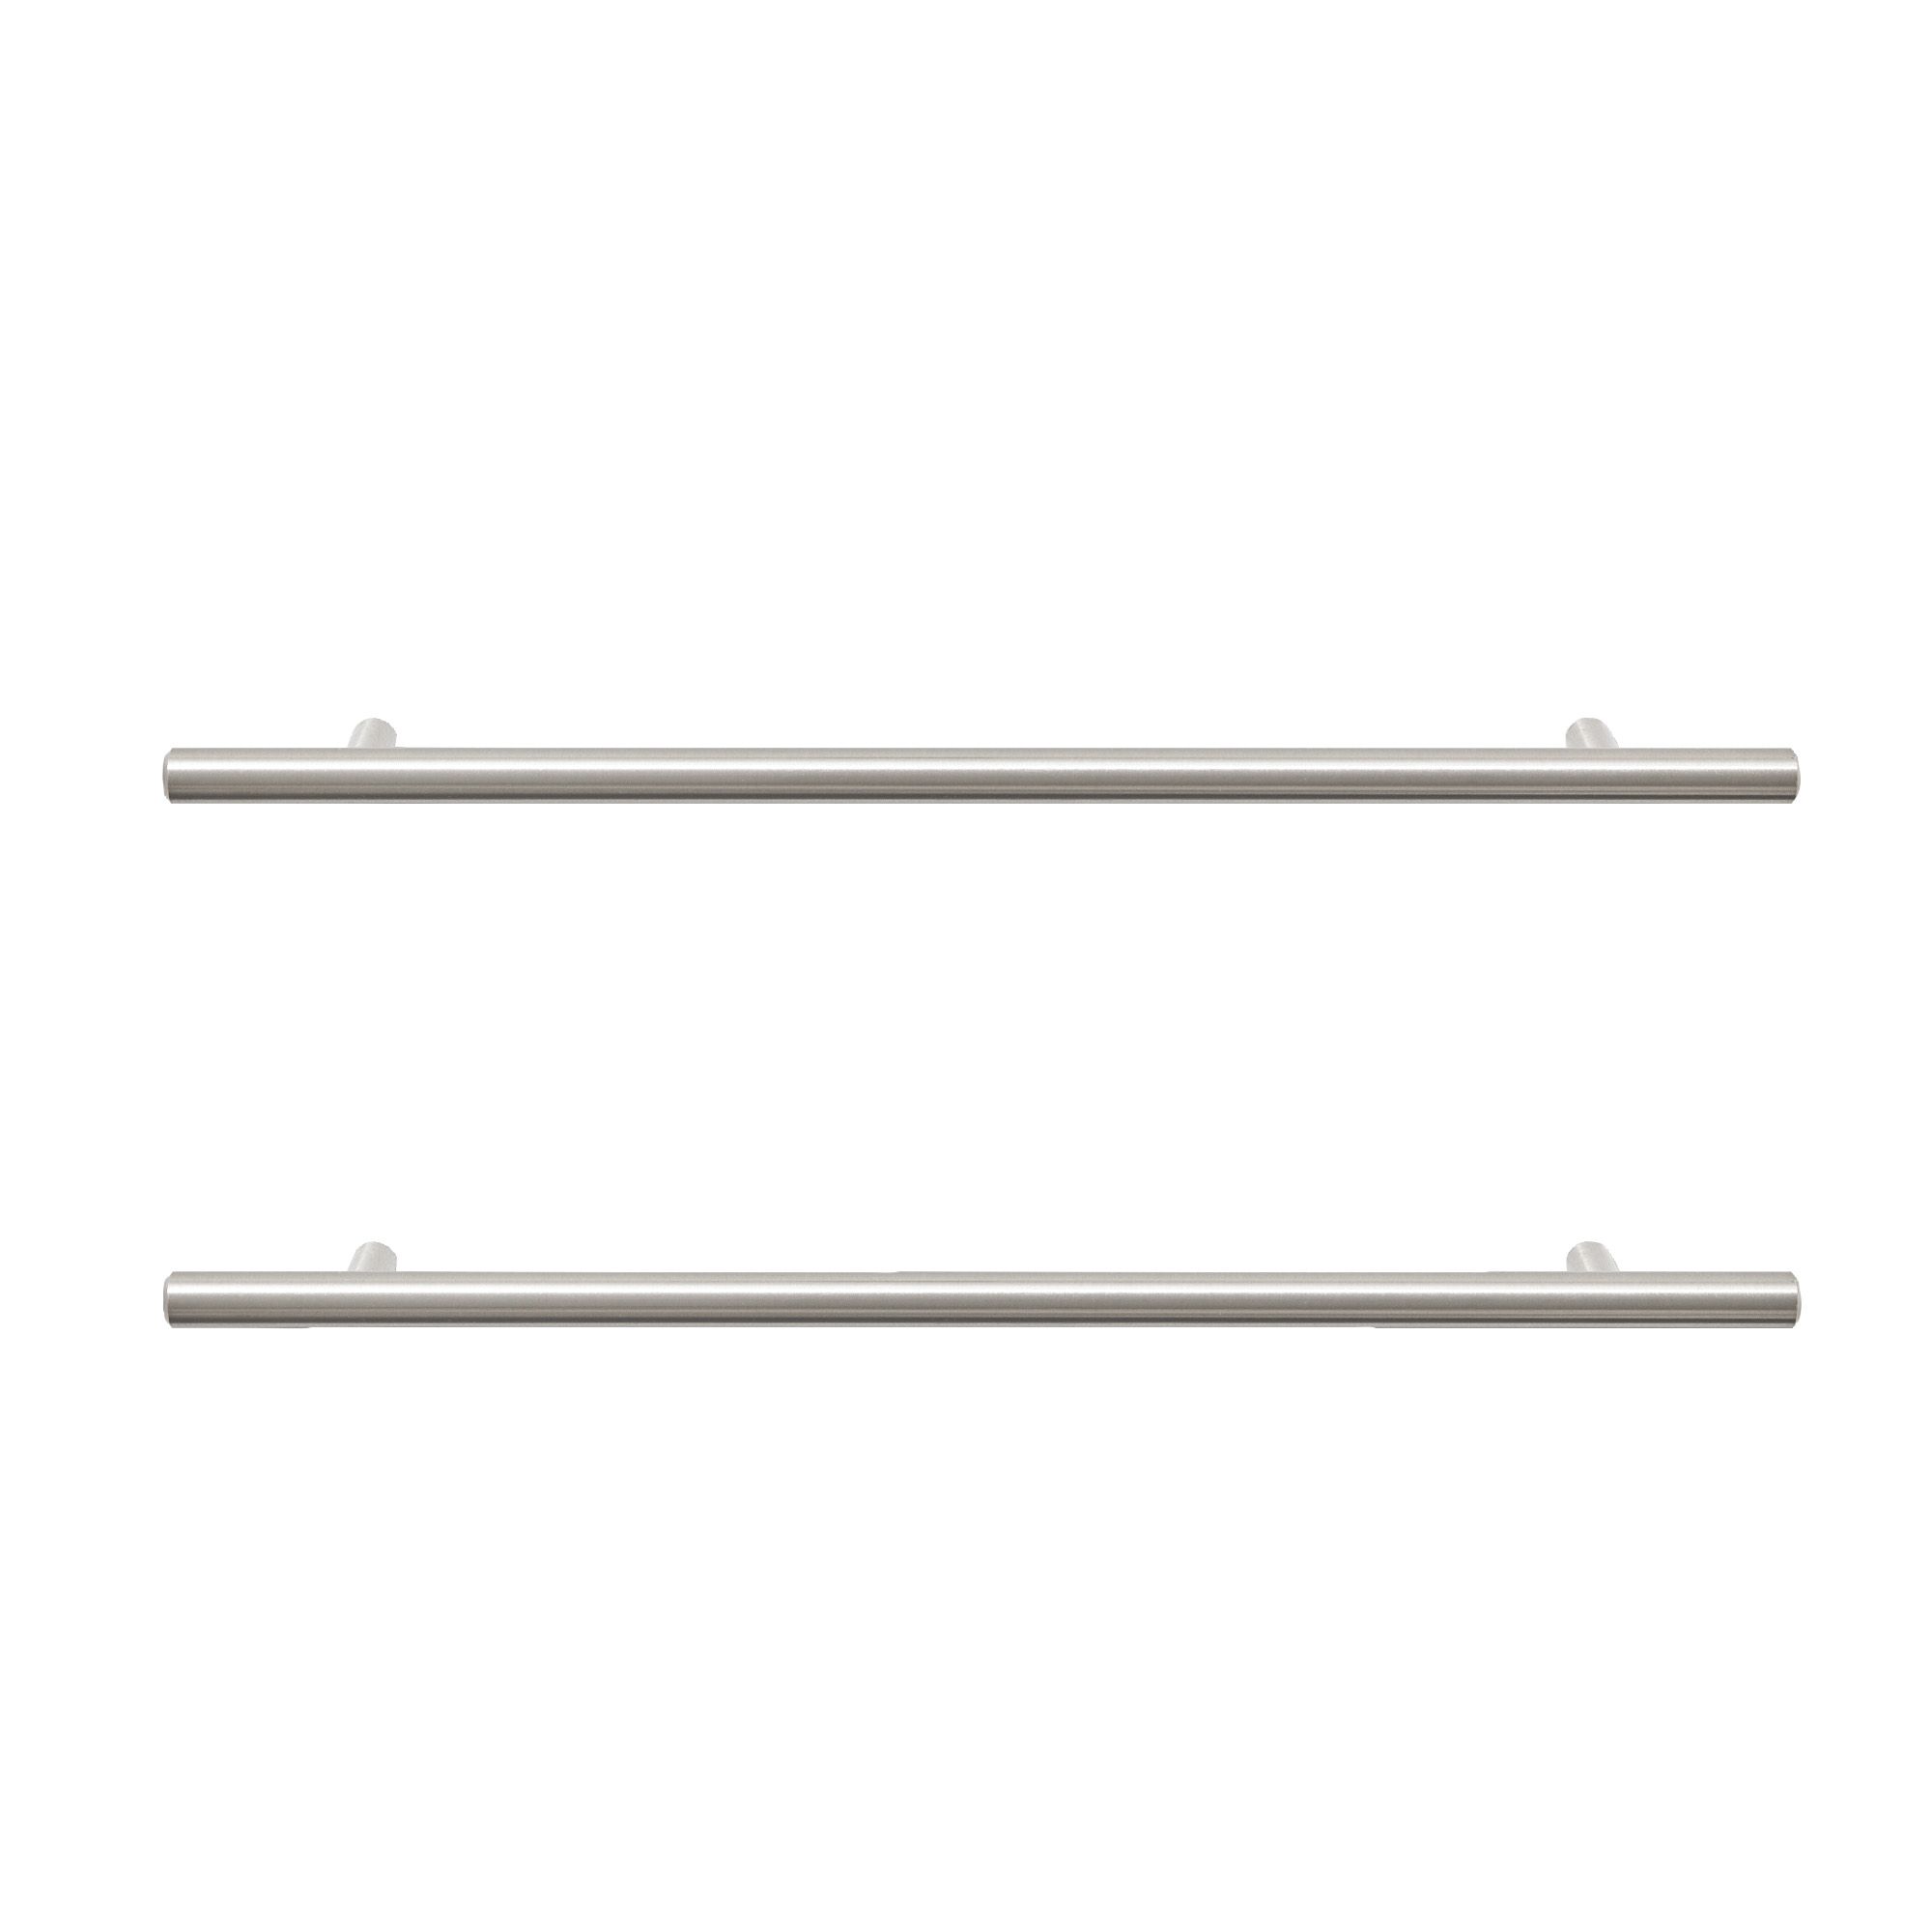 GoodHome Annatto Nickel effect Kitchen cabinets Handle (L)33.6cm, Pack of 2